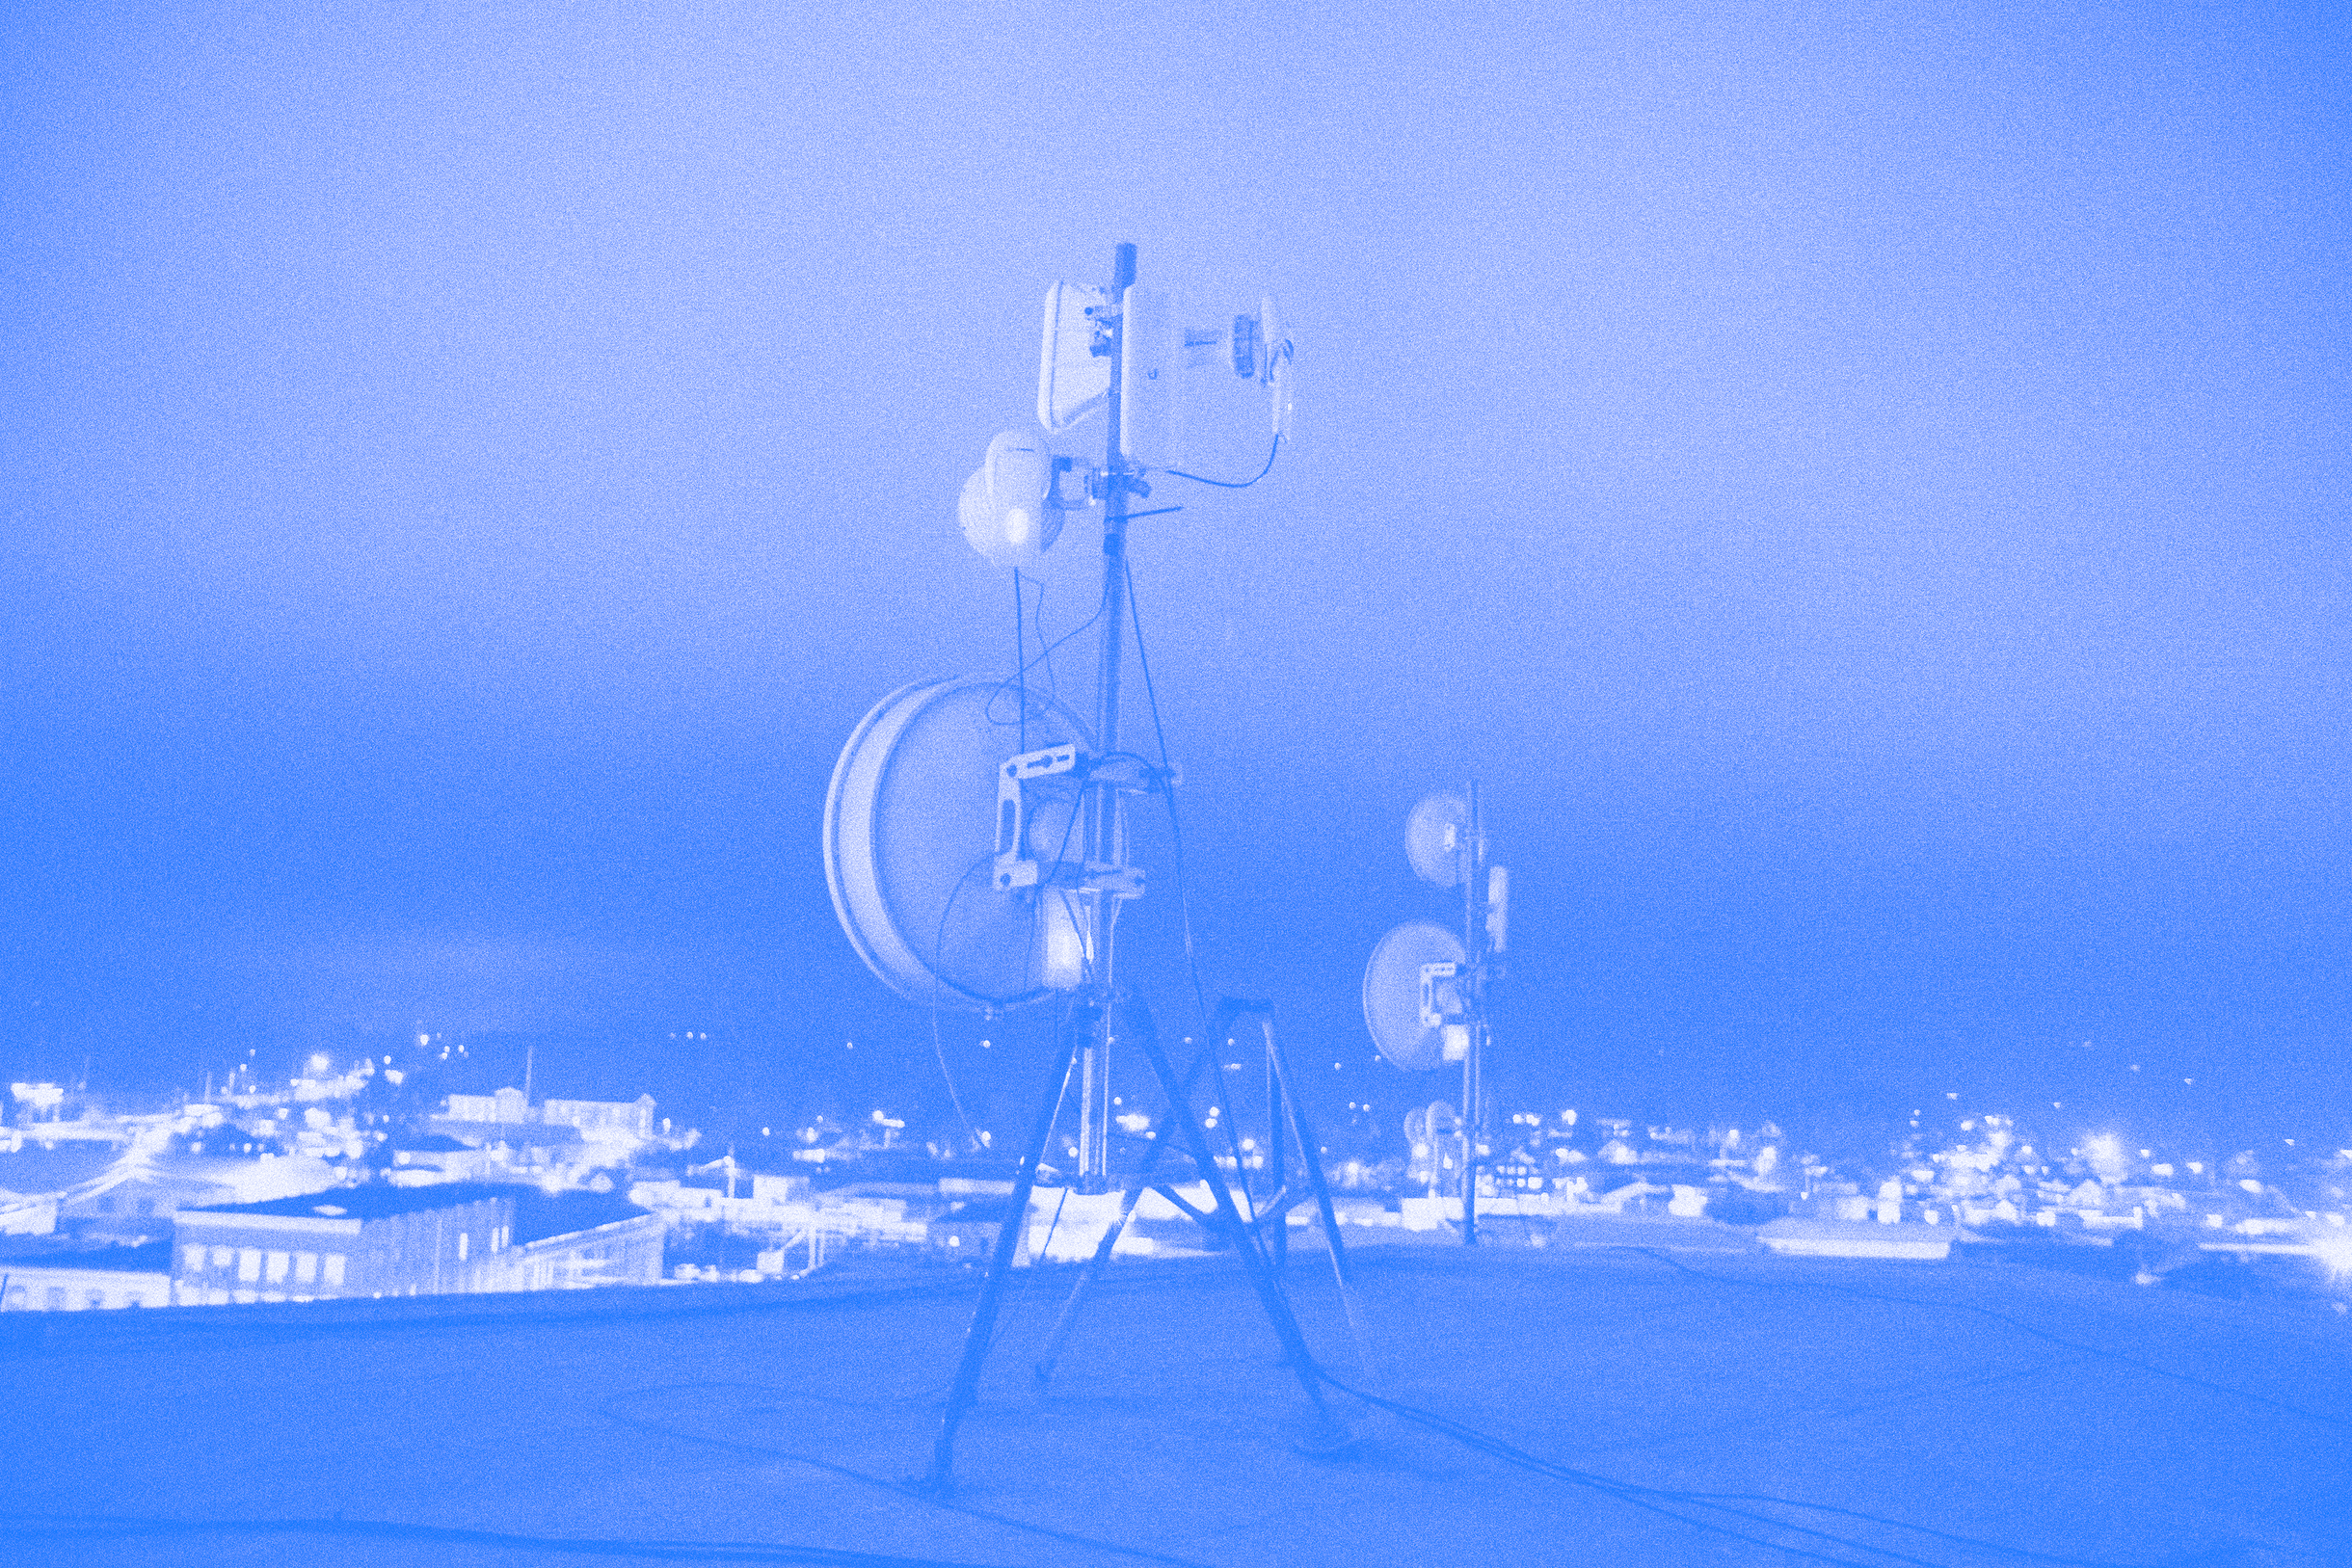 A stylized photograph of Althea telecommunications antennae on an urban rooftop at night.